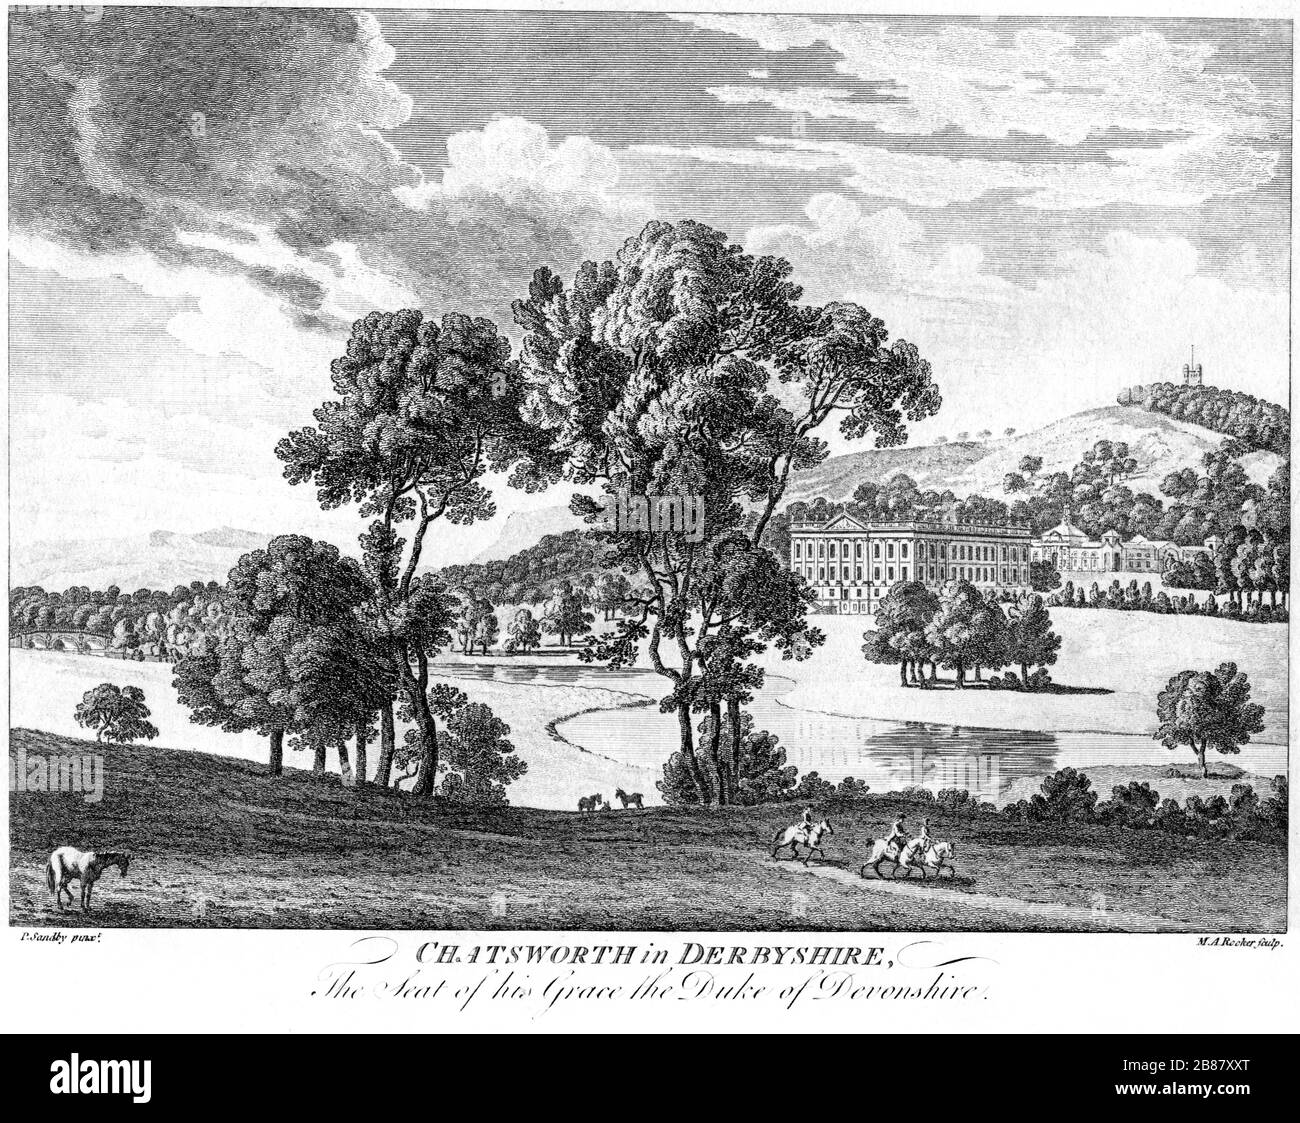 An engraving of Chatsworth in Derbyshire, the Seat of his Grace the Duke of Devonshire scanned at high resolution from a book published around 1786. Stock Photo